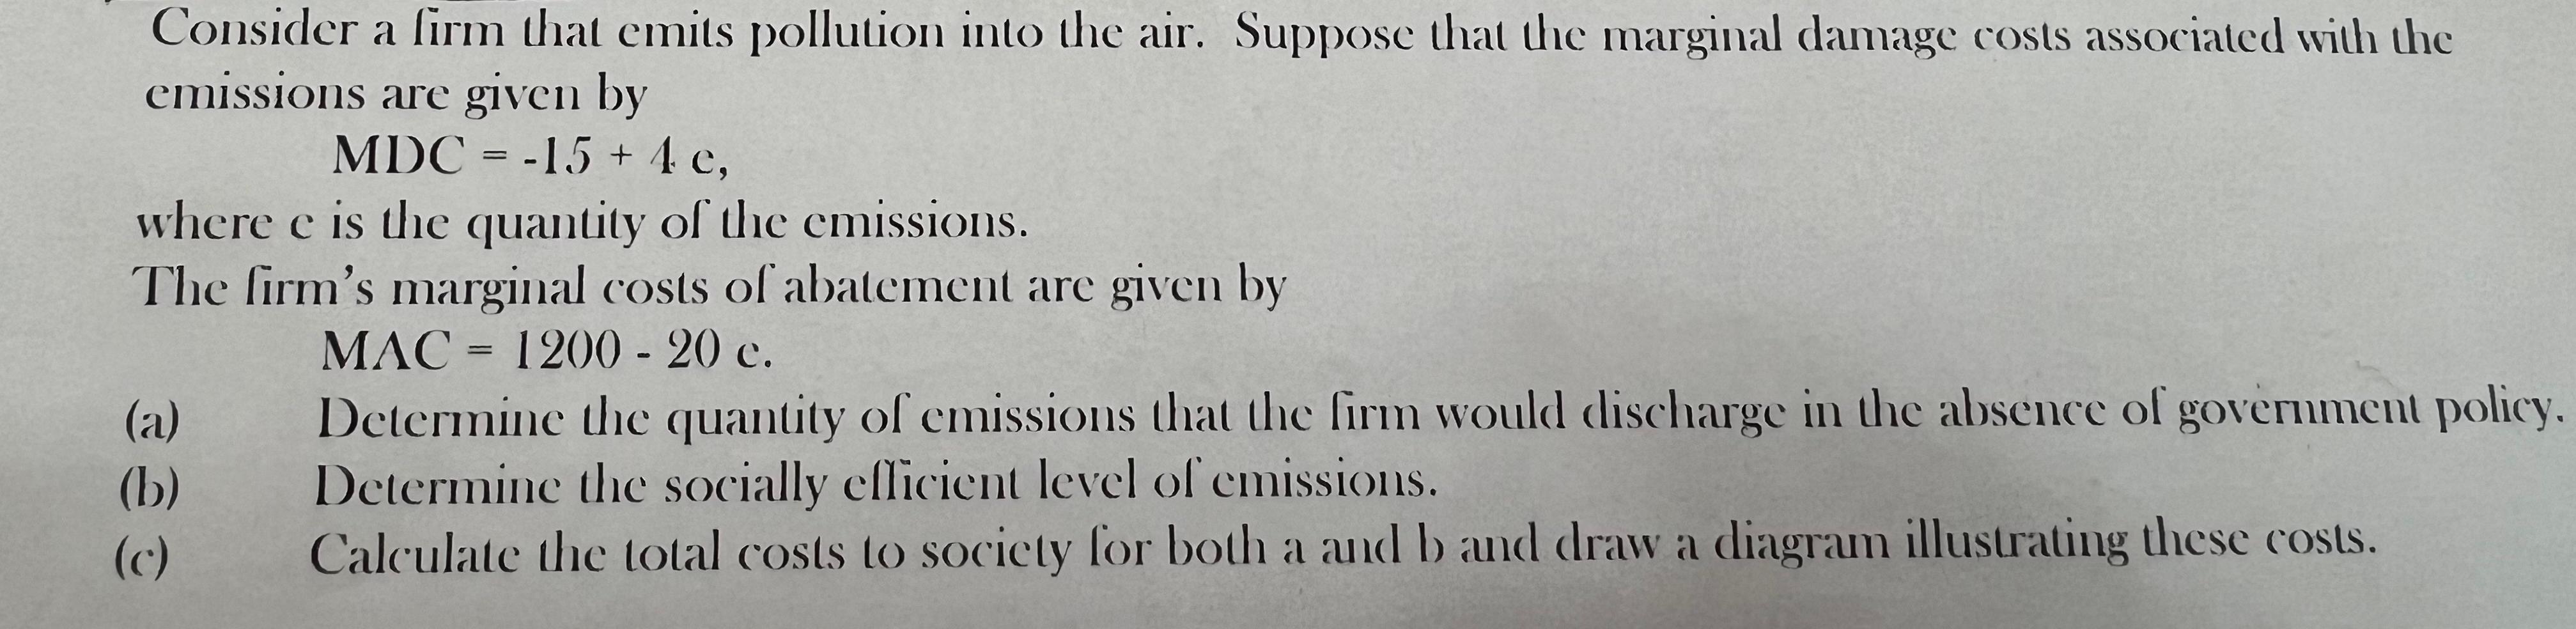 Consider a firm that emits pollution into the air. Suppose that the marginal damage costs associated with the emissions are g